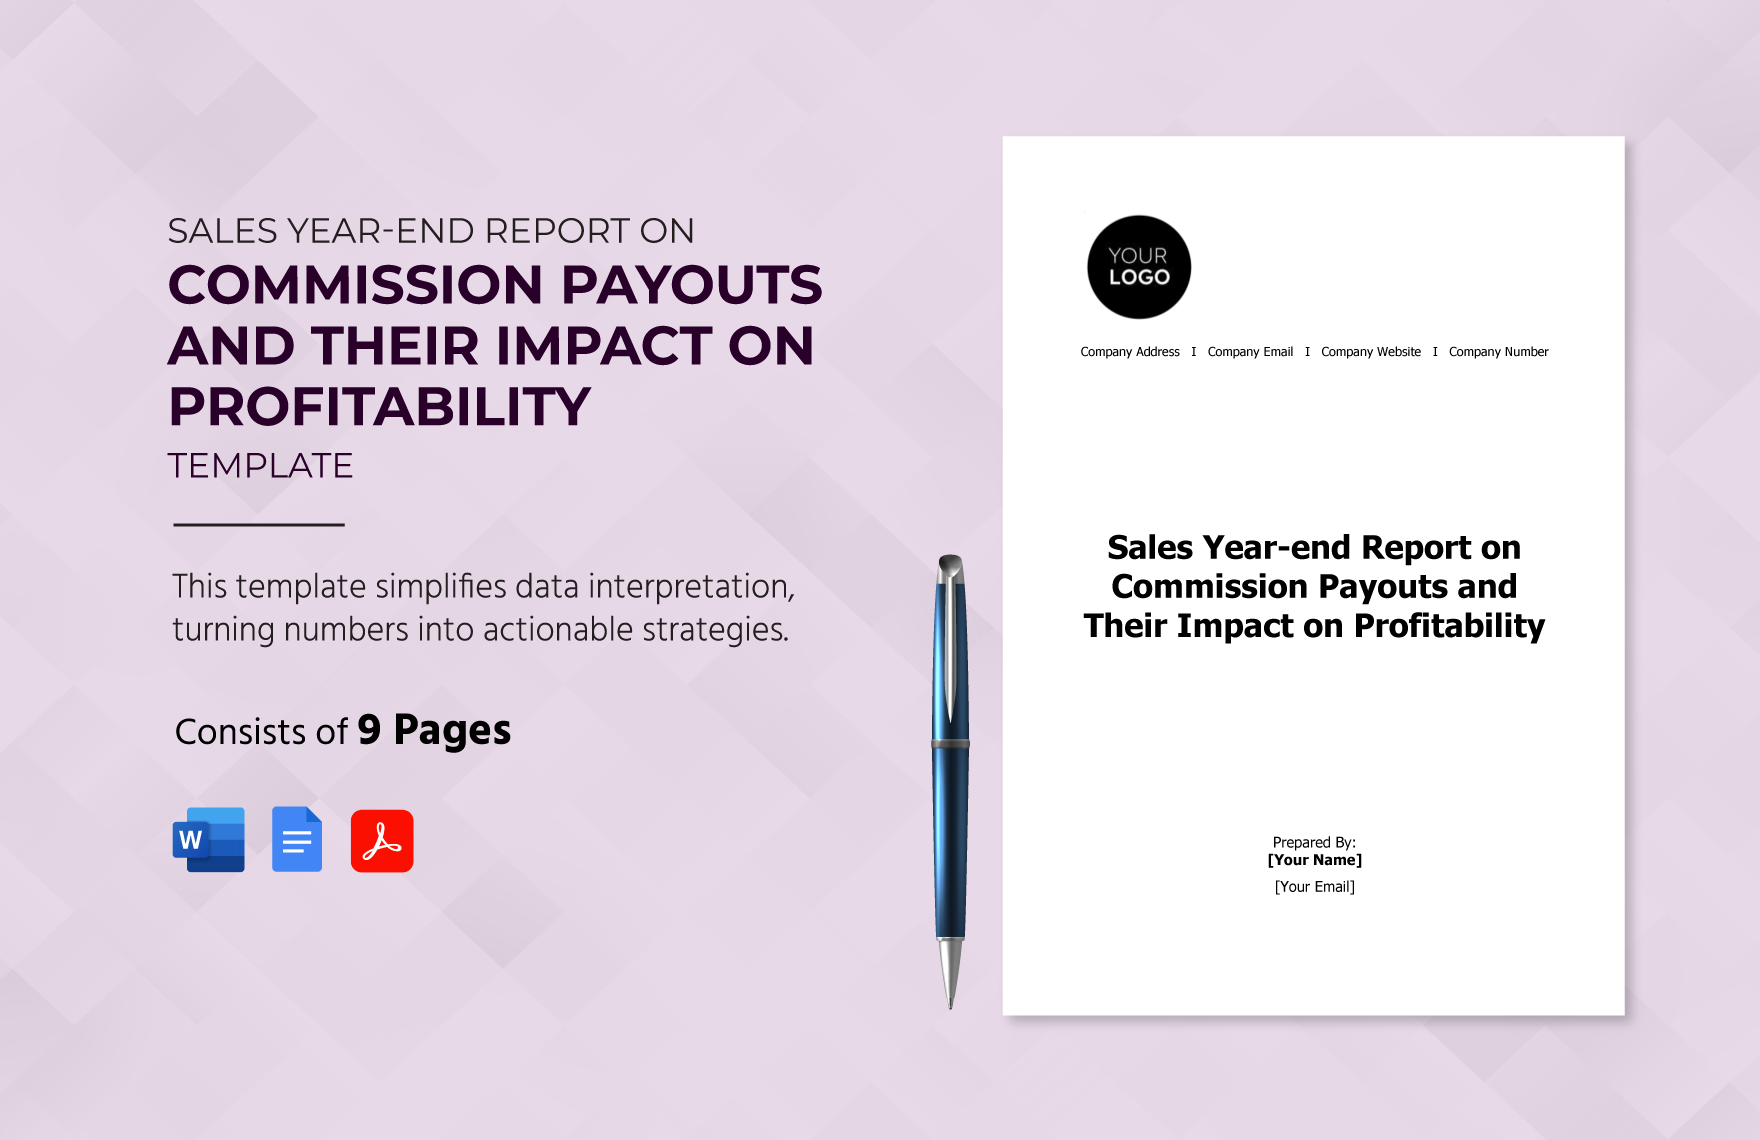 Sales Year-end Report on Commission Payouts and Their Impact on Profitability Template